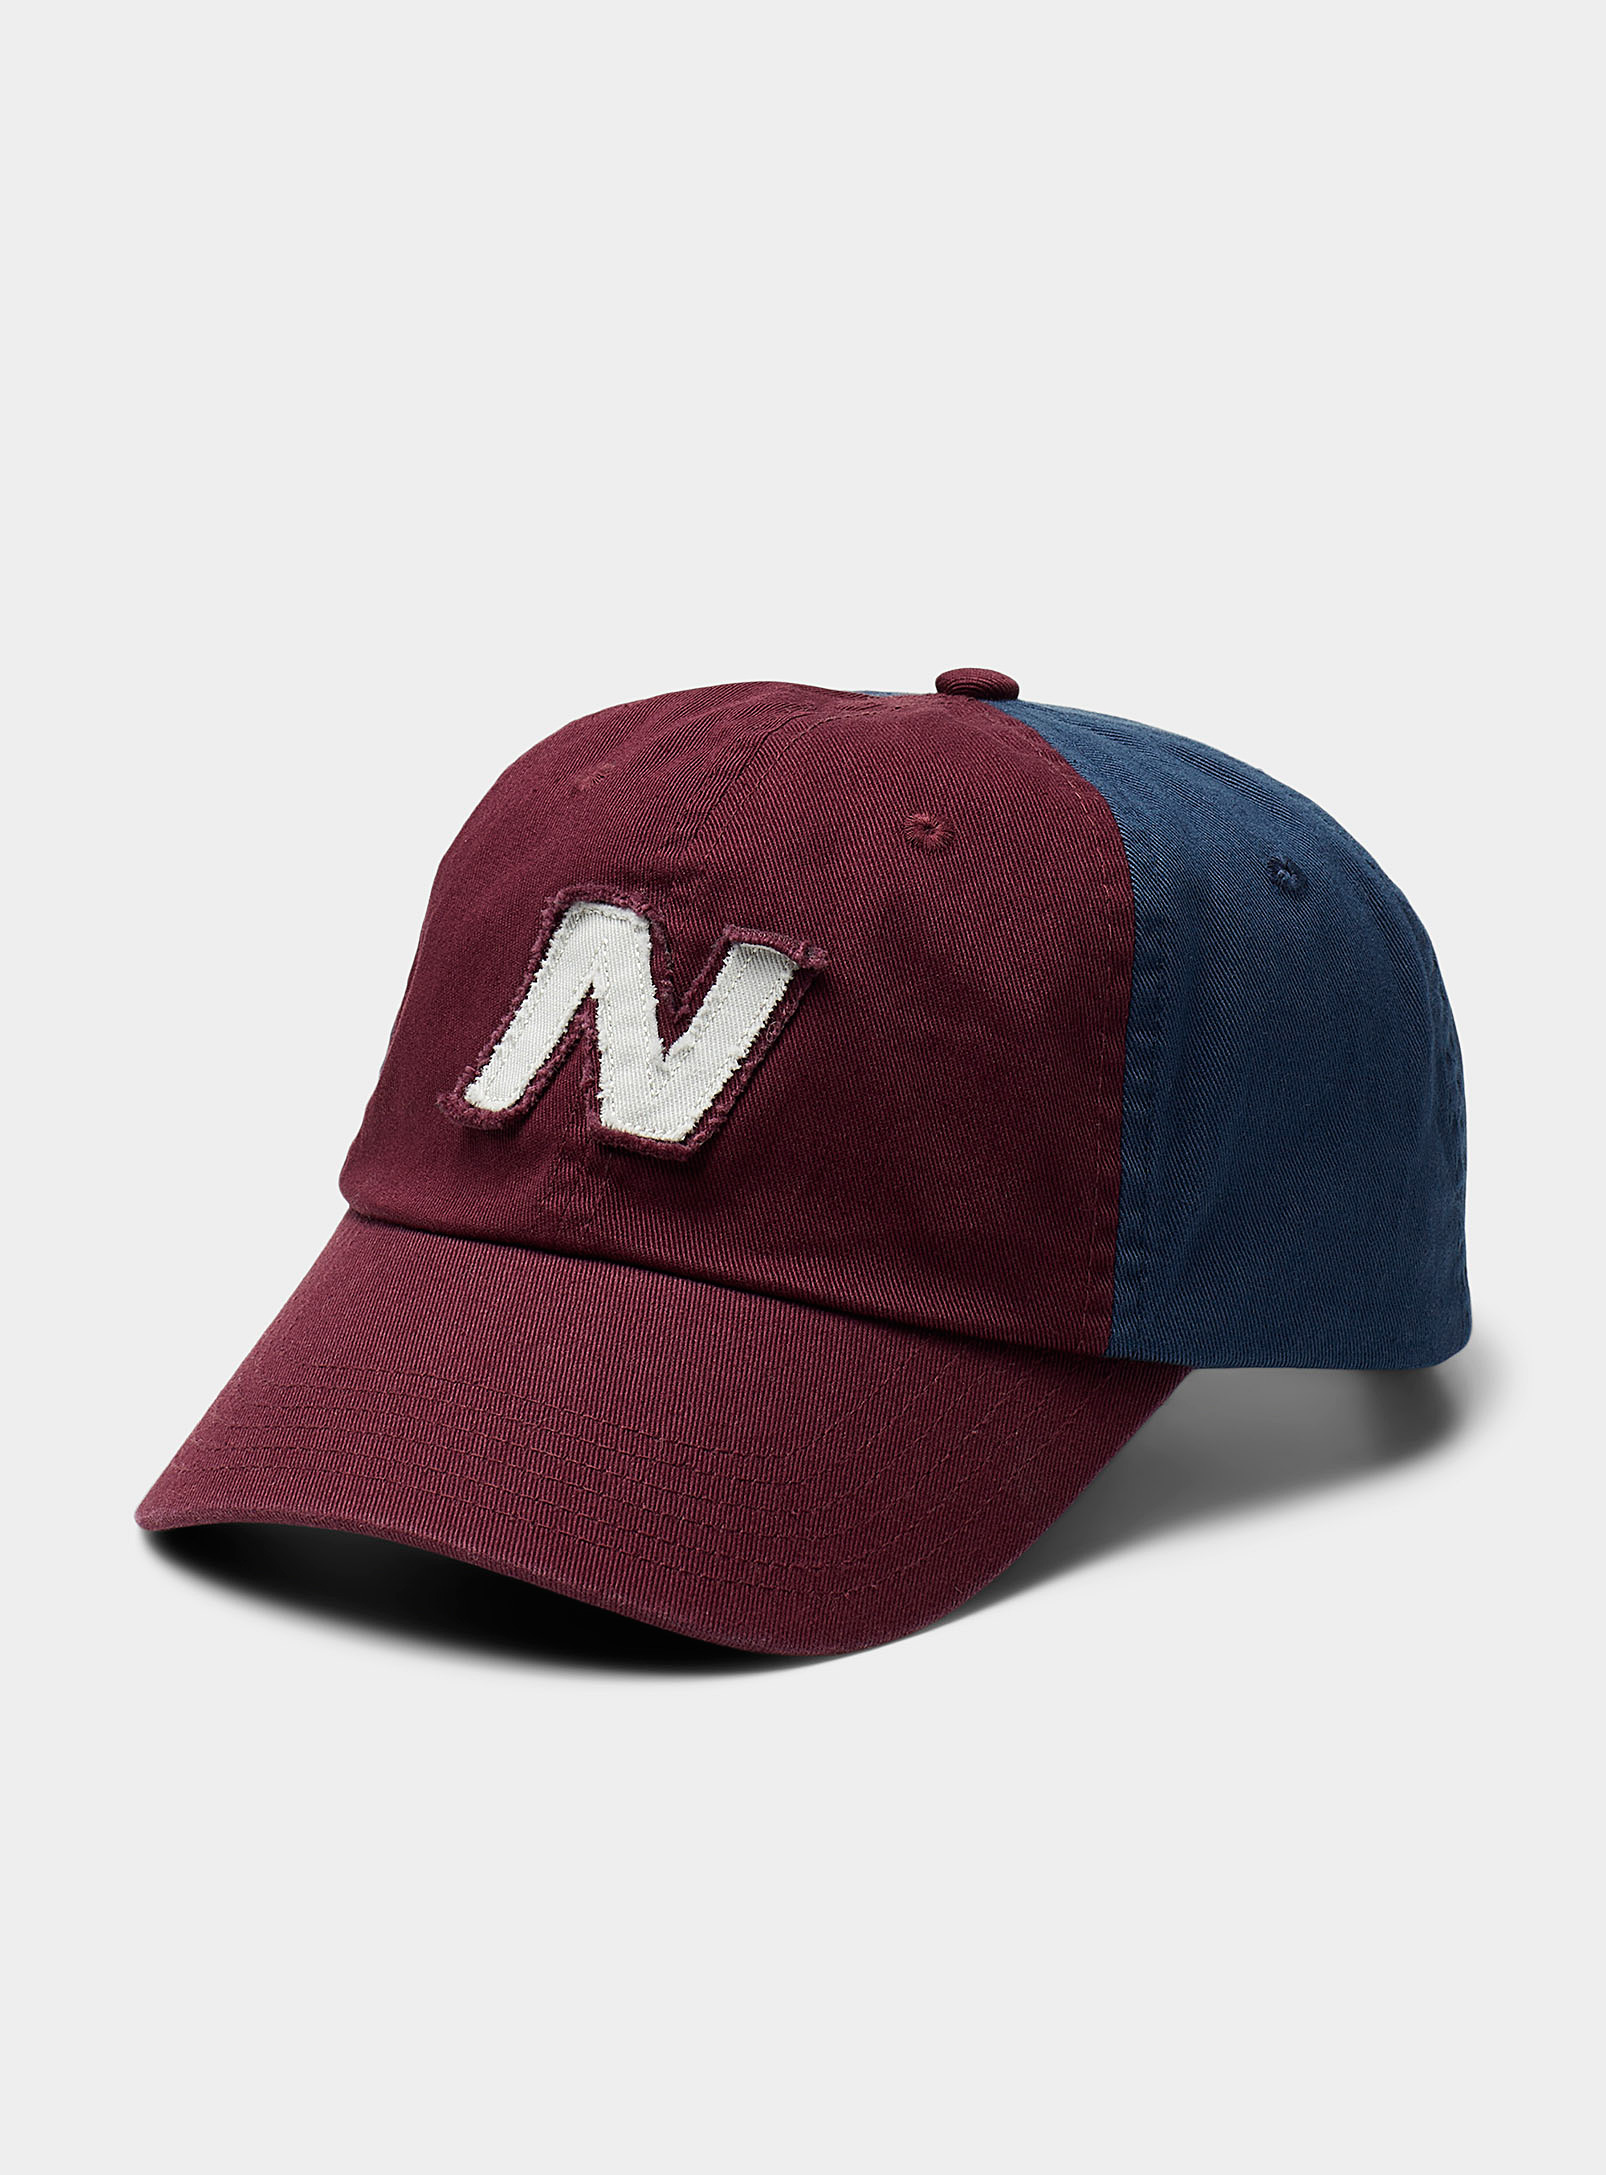 New Balance Colour Block Dad Cap In Patterned Red